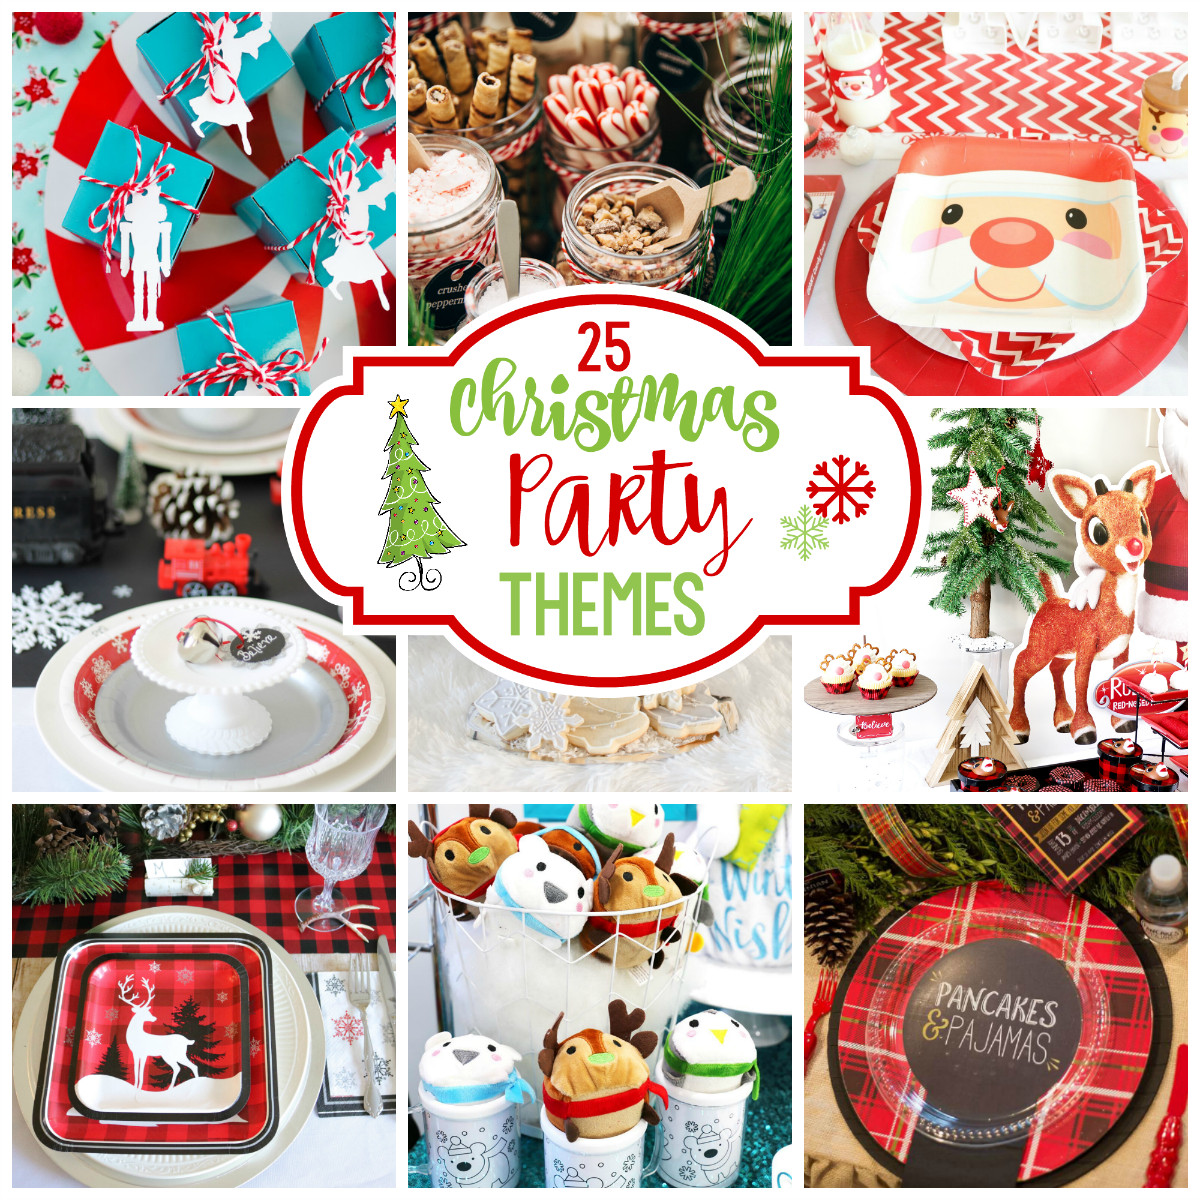 22-virtual-christmas-party-ideas-in-2020-holidays-work-christmas